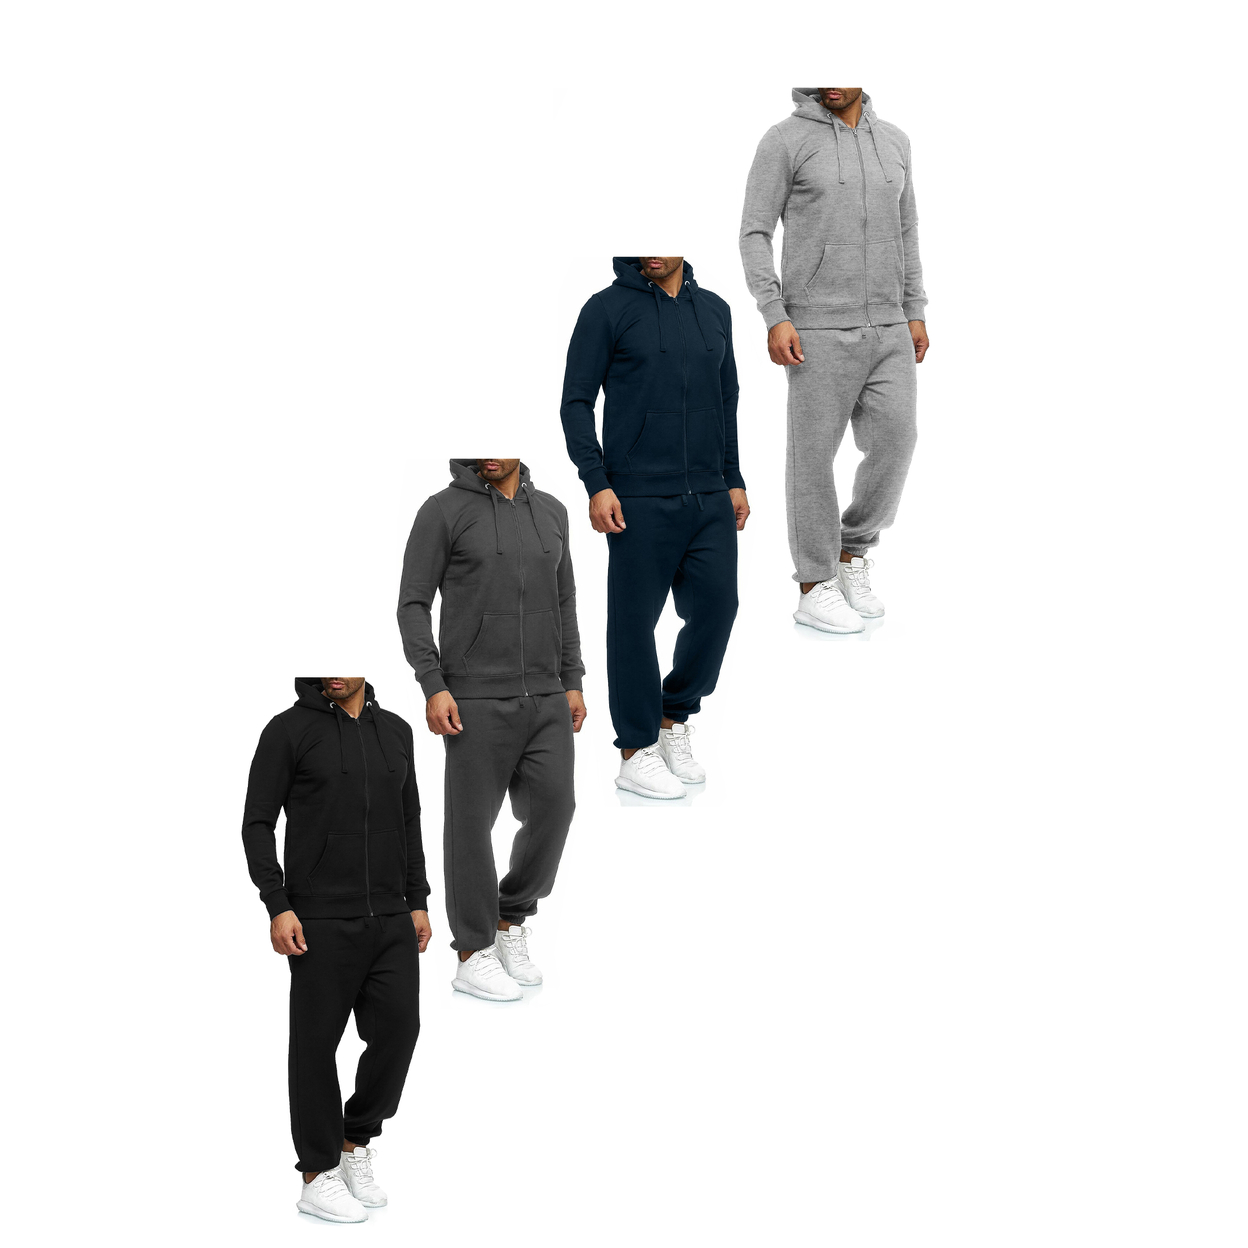 Multi-Pack: Men's Casual Big & Tall Athletic Active Winter Warm Fleece Lined Full Zip Tracksuit Jogger Set - Charcoal, 1-pack, 3xl